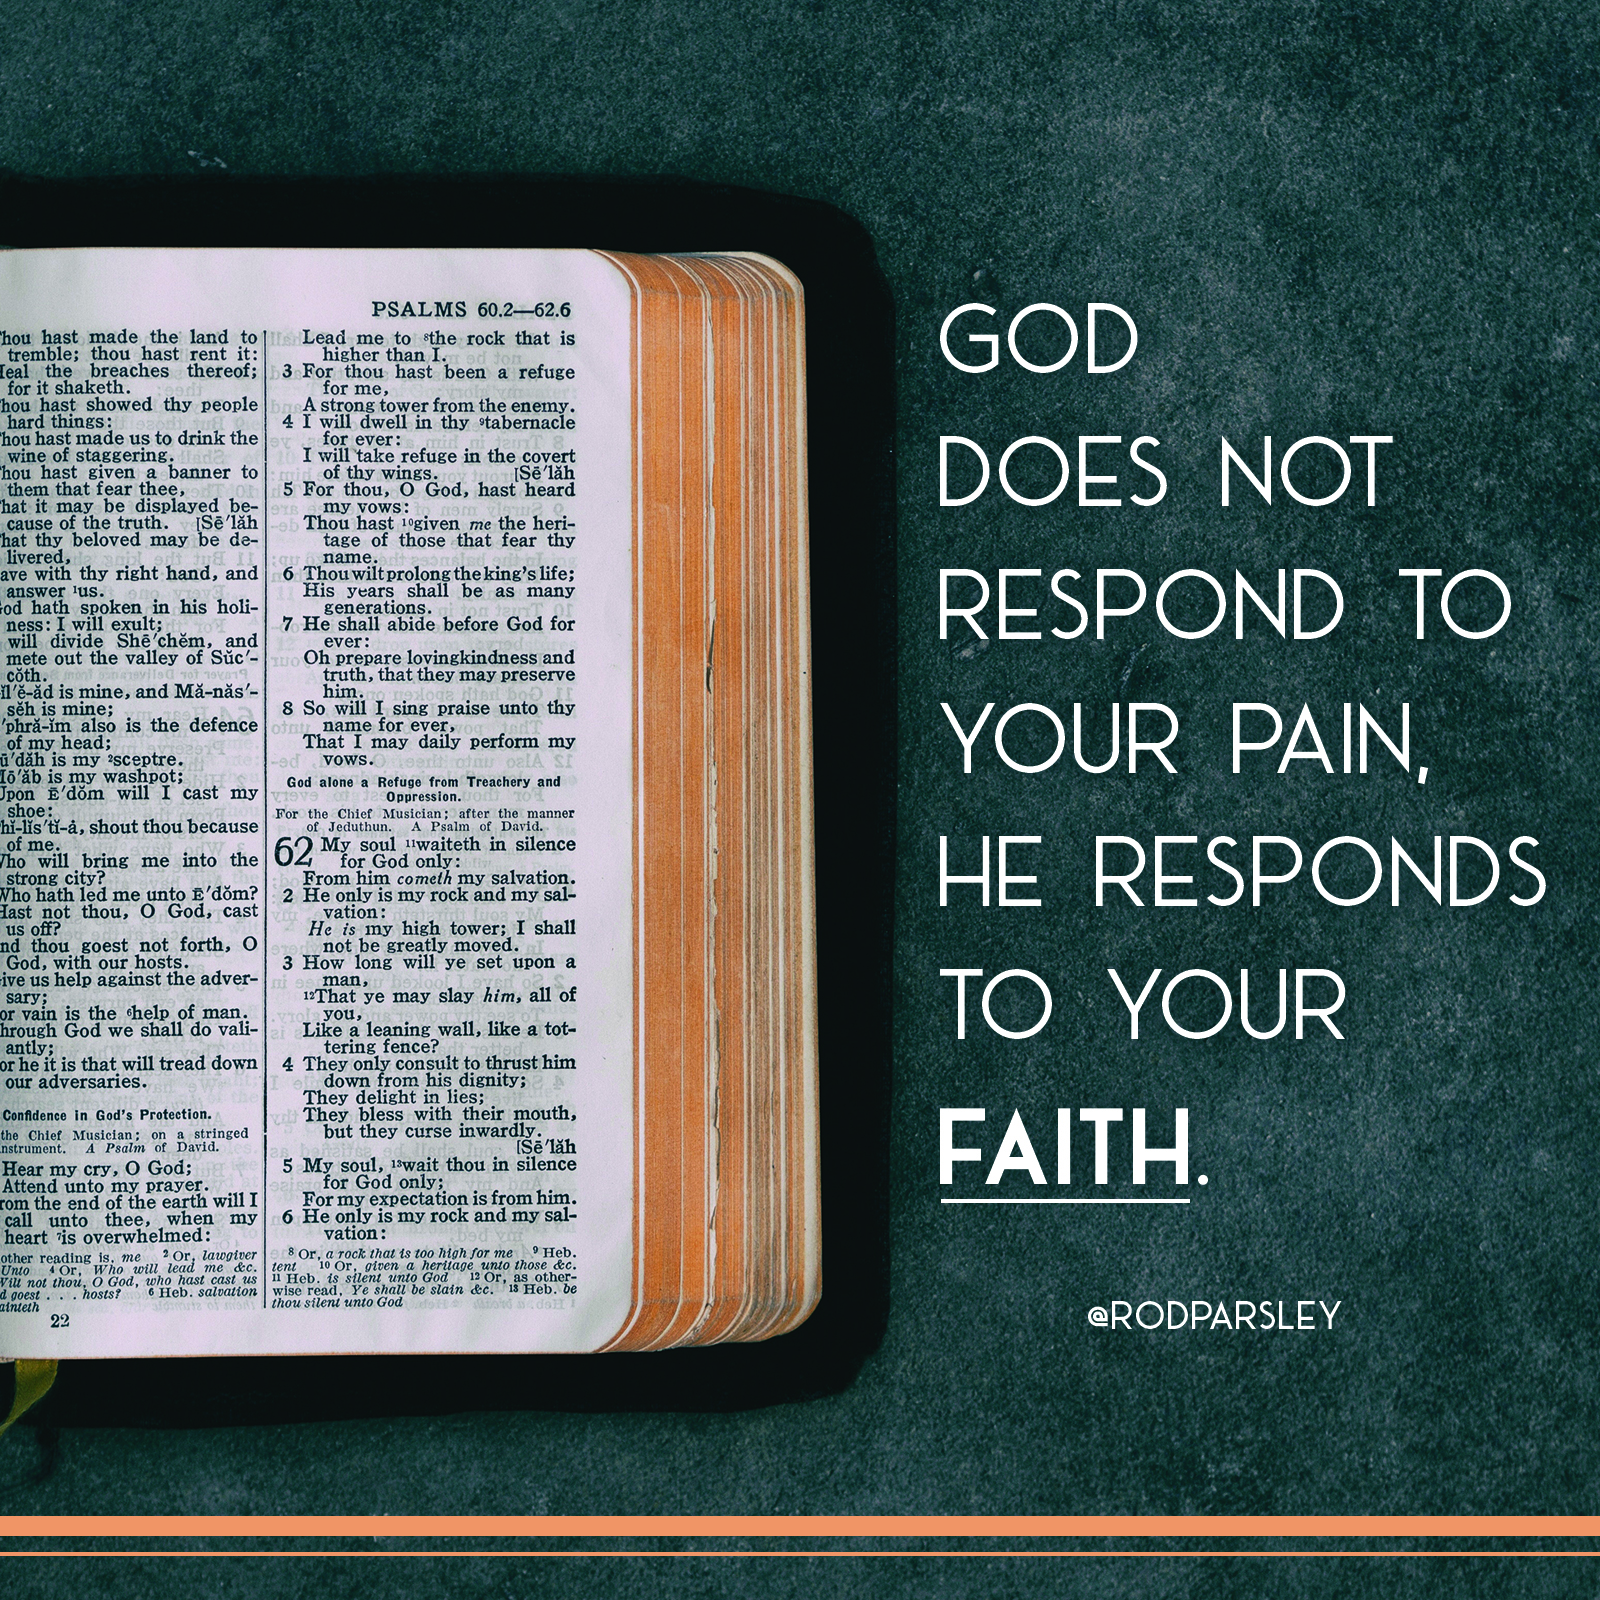 “God does not respond to your pain, He responds to your faith” – Pastor Rod Parsley